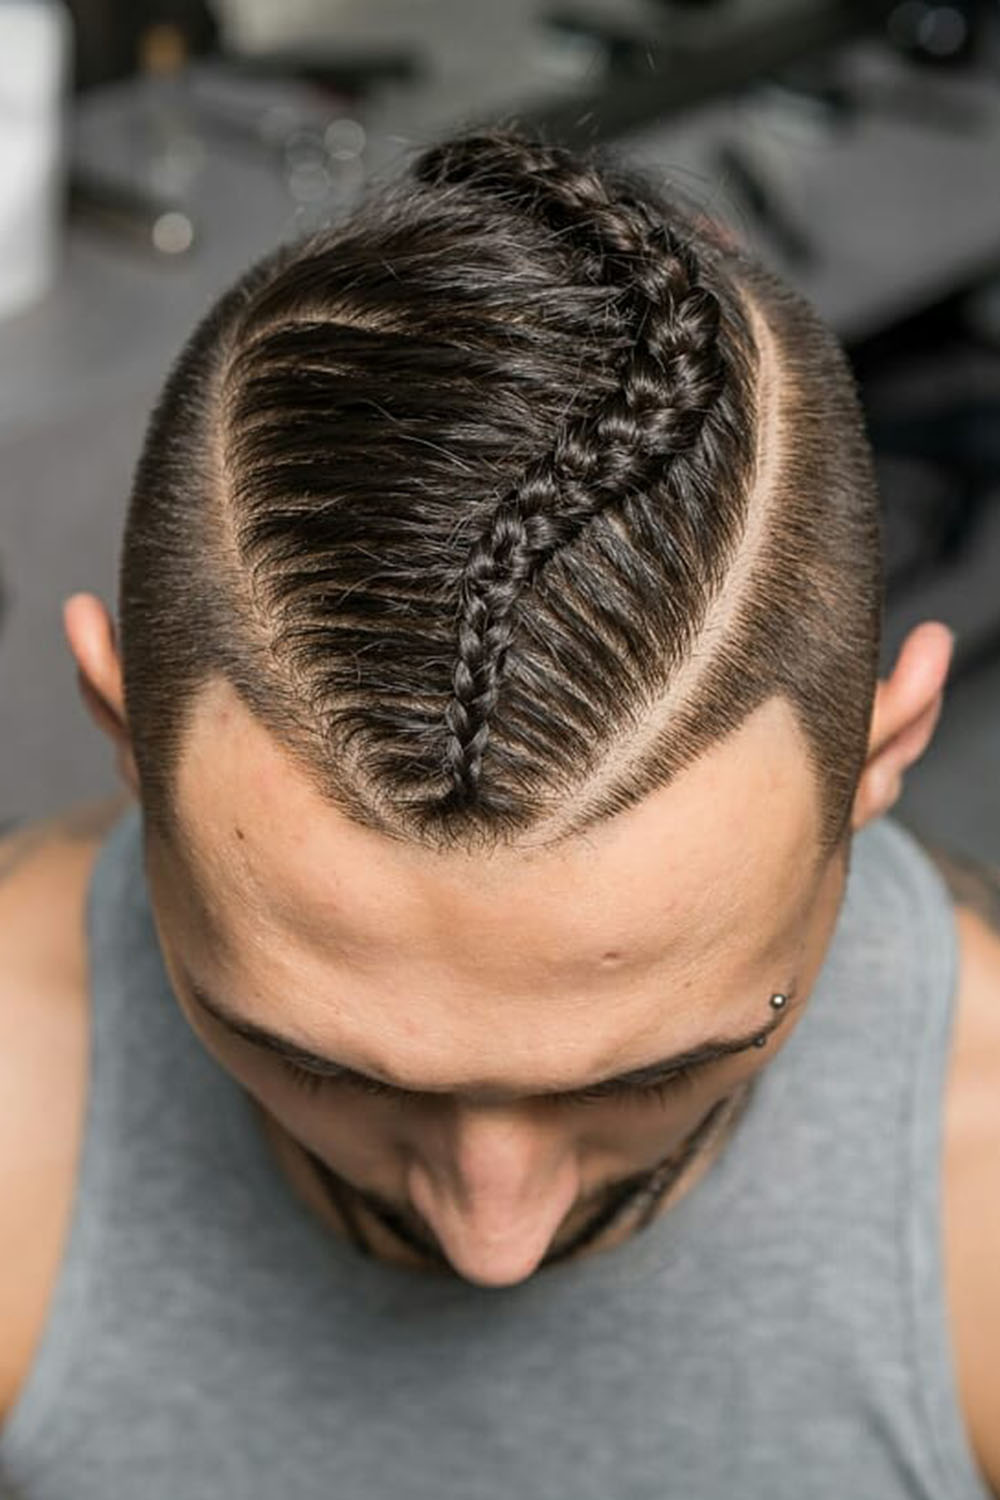 Men's Undercut Hairstyle with Long Braid